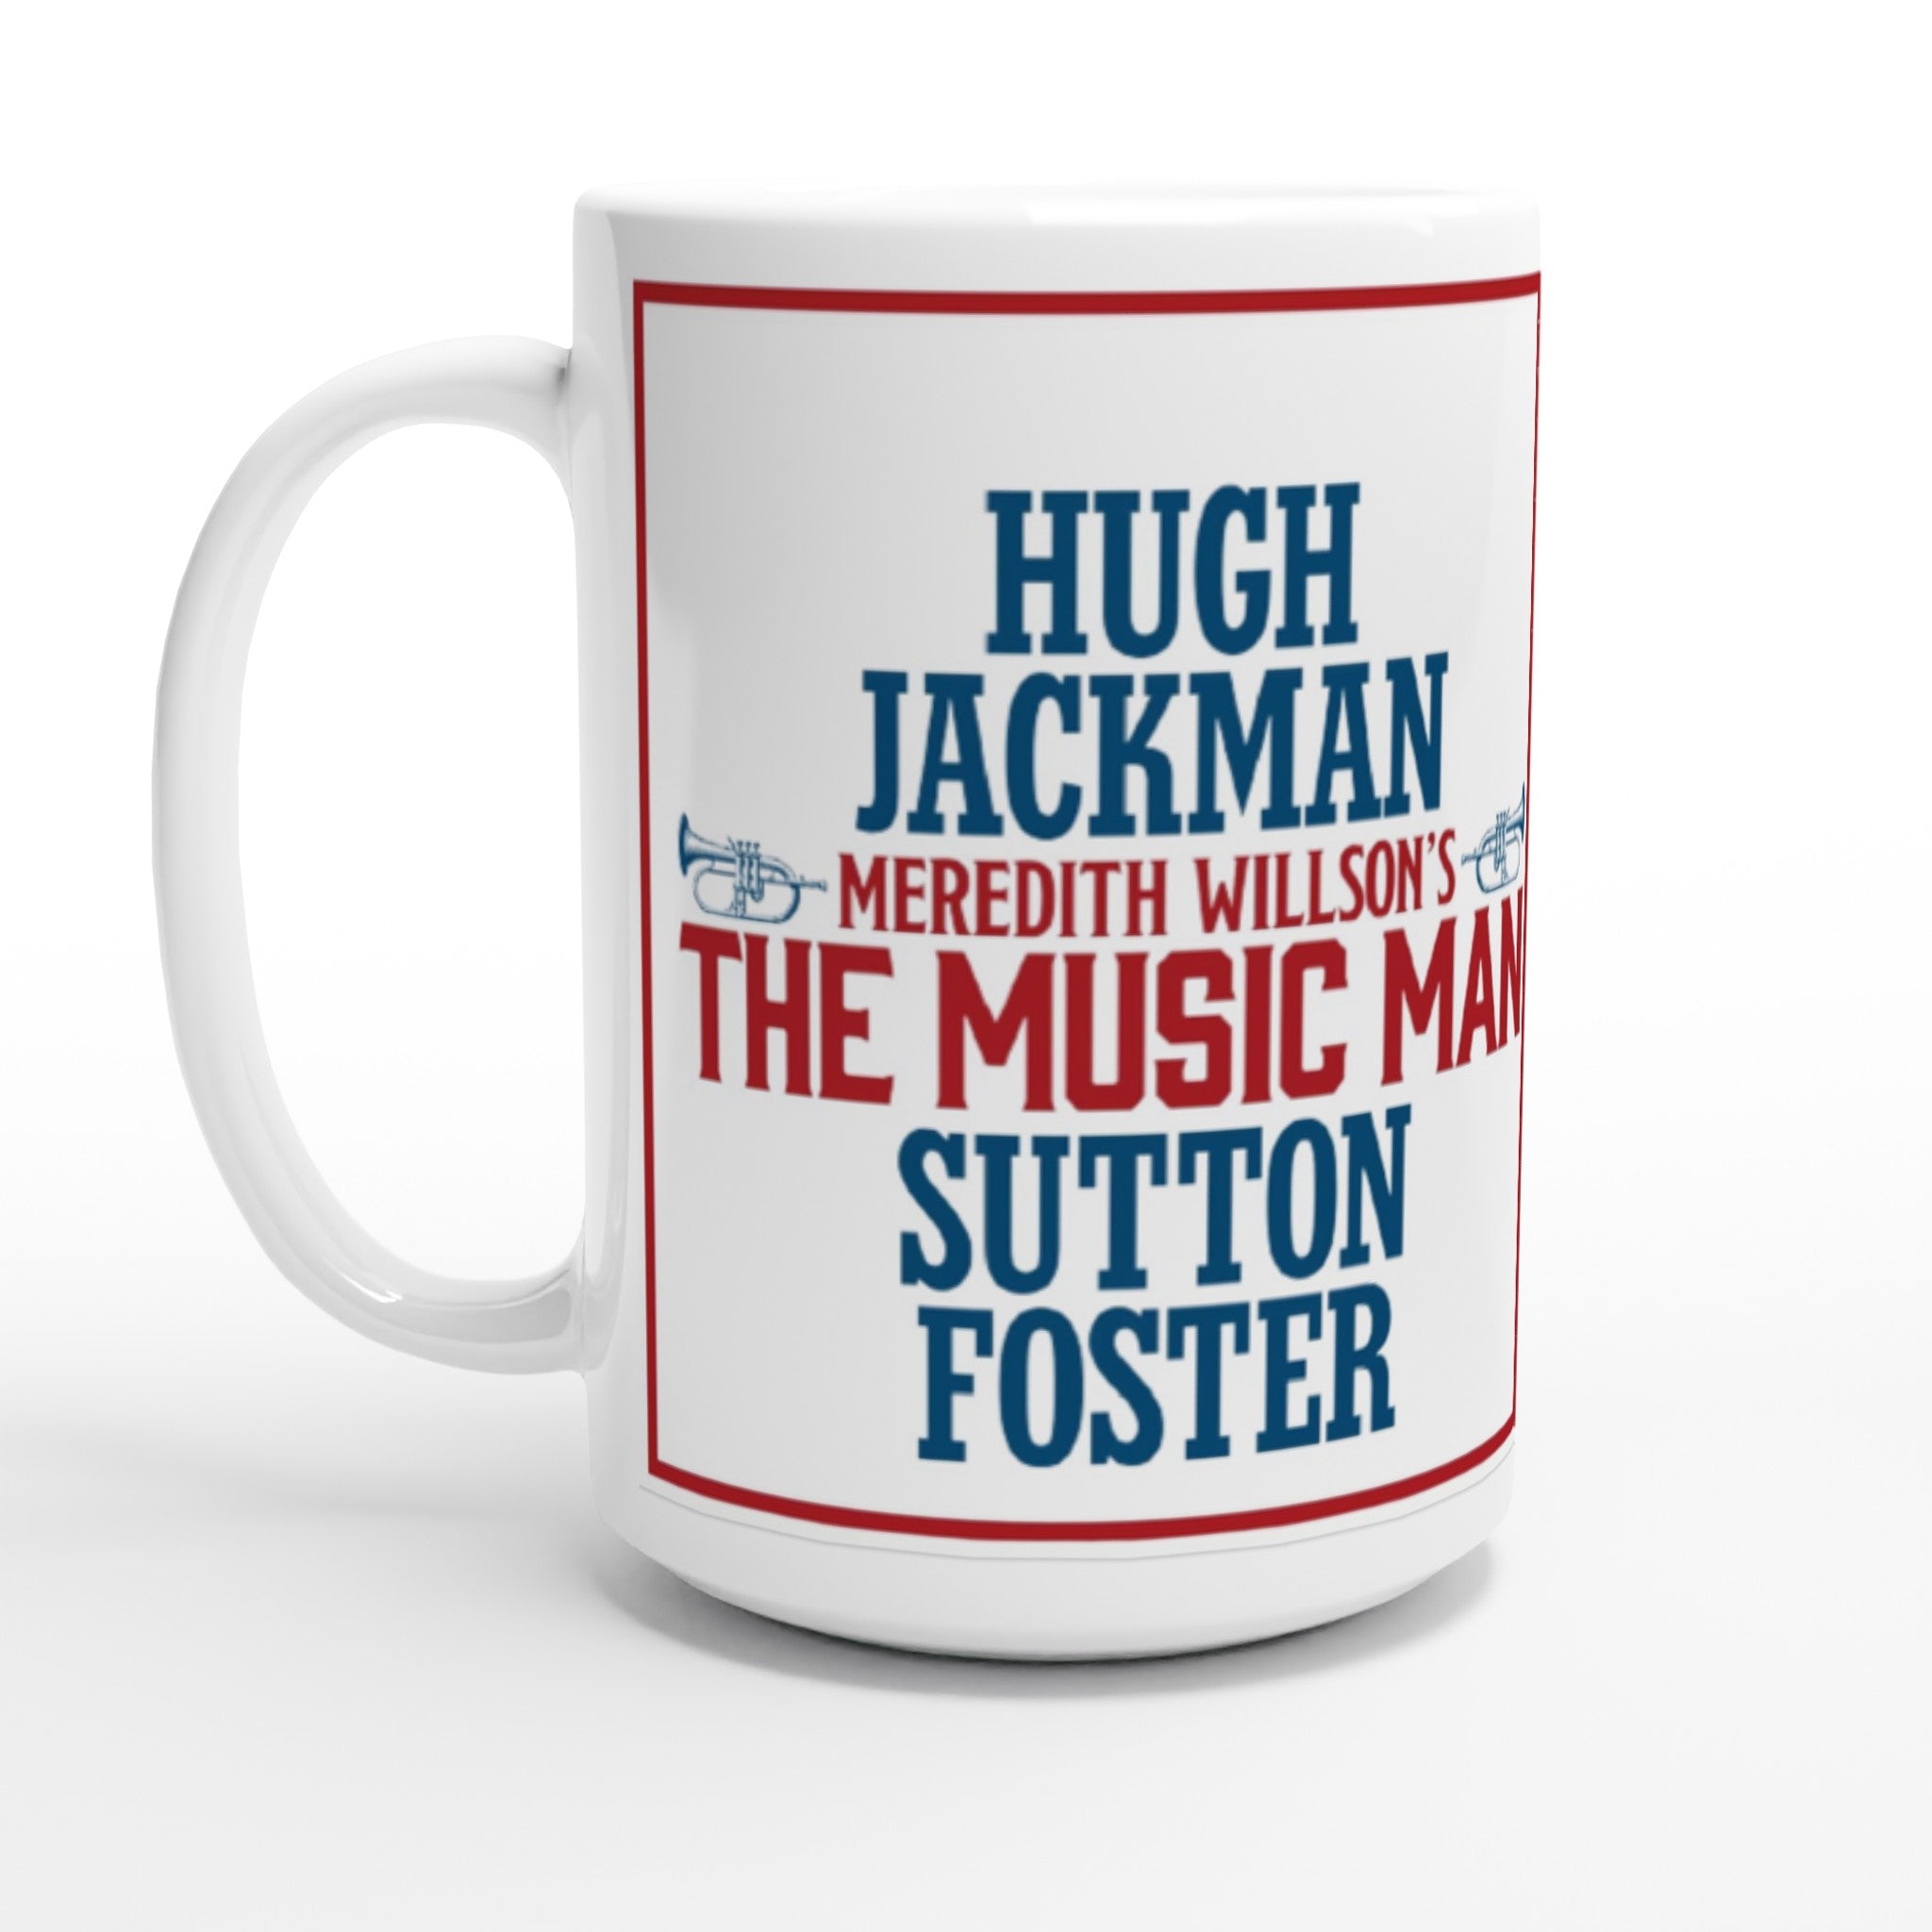 The Music Man- White 11oz Ceramic Mug with Color Inside - Creations by Chris and Carlos